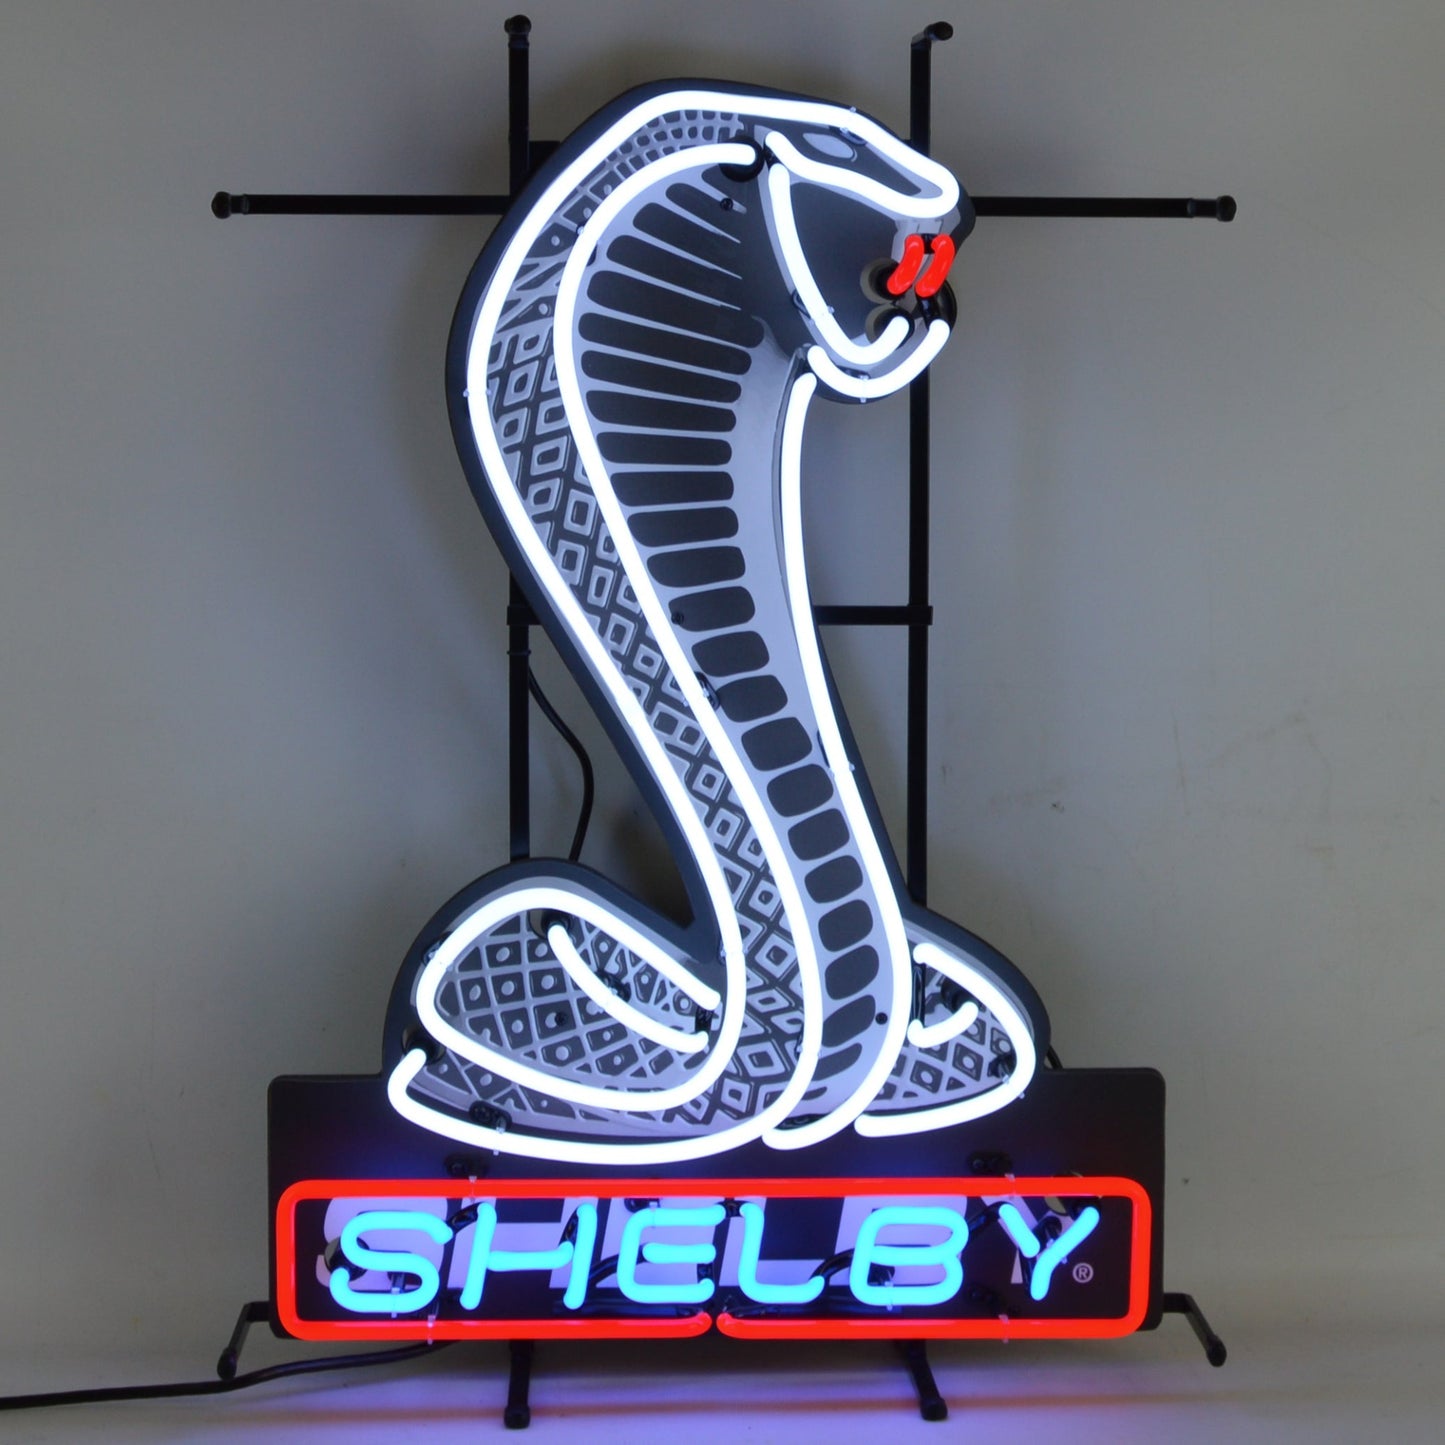 Shelby Cobra Neon Sign, 20 inches wide by 28 inches high, showcasing the iconic Shelby Cobra logo in neon lights.